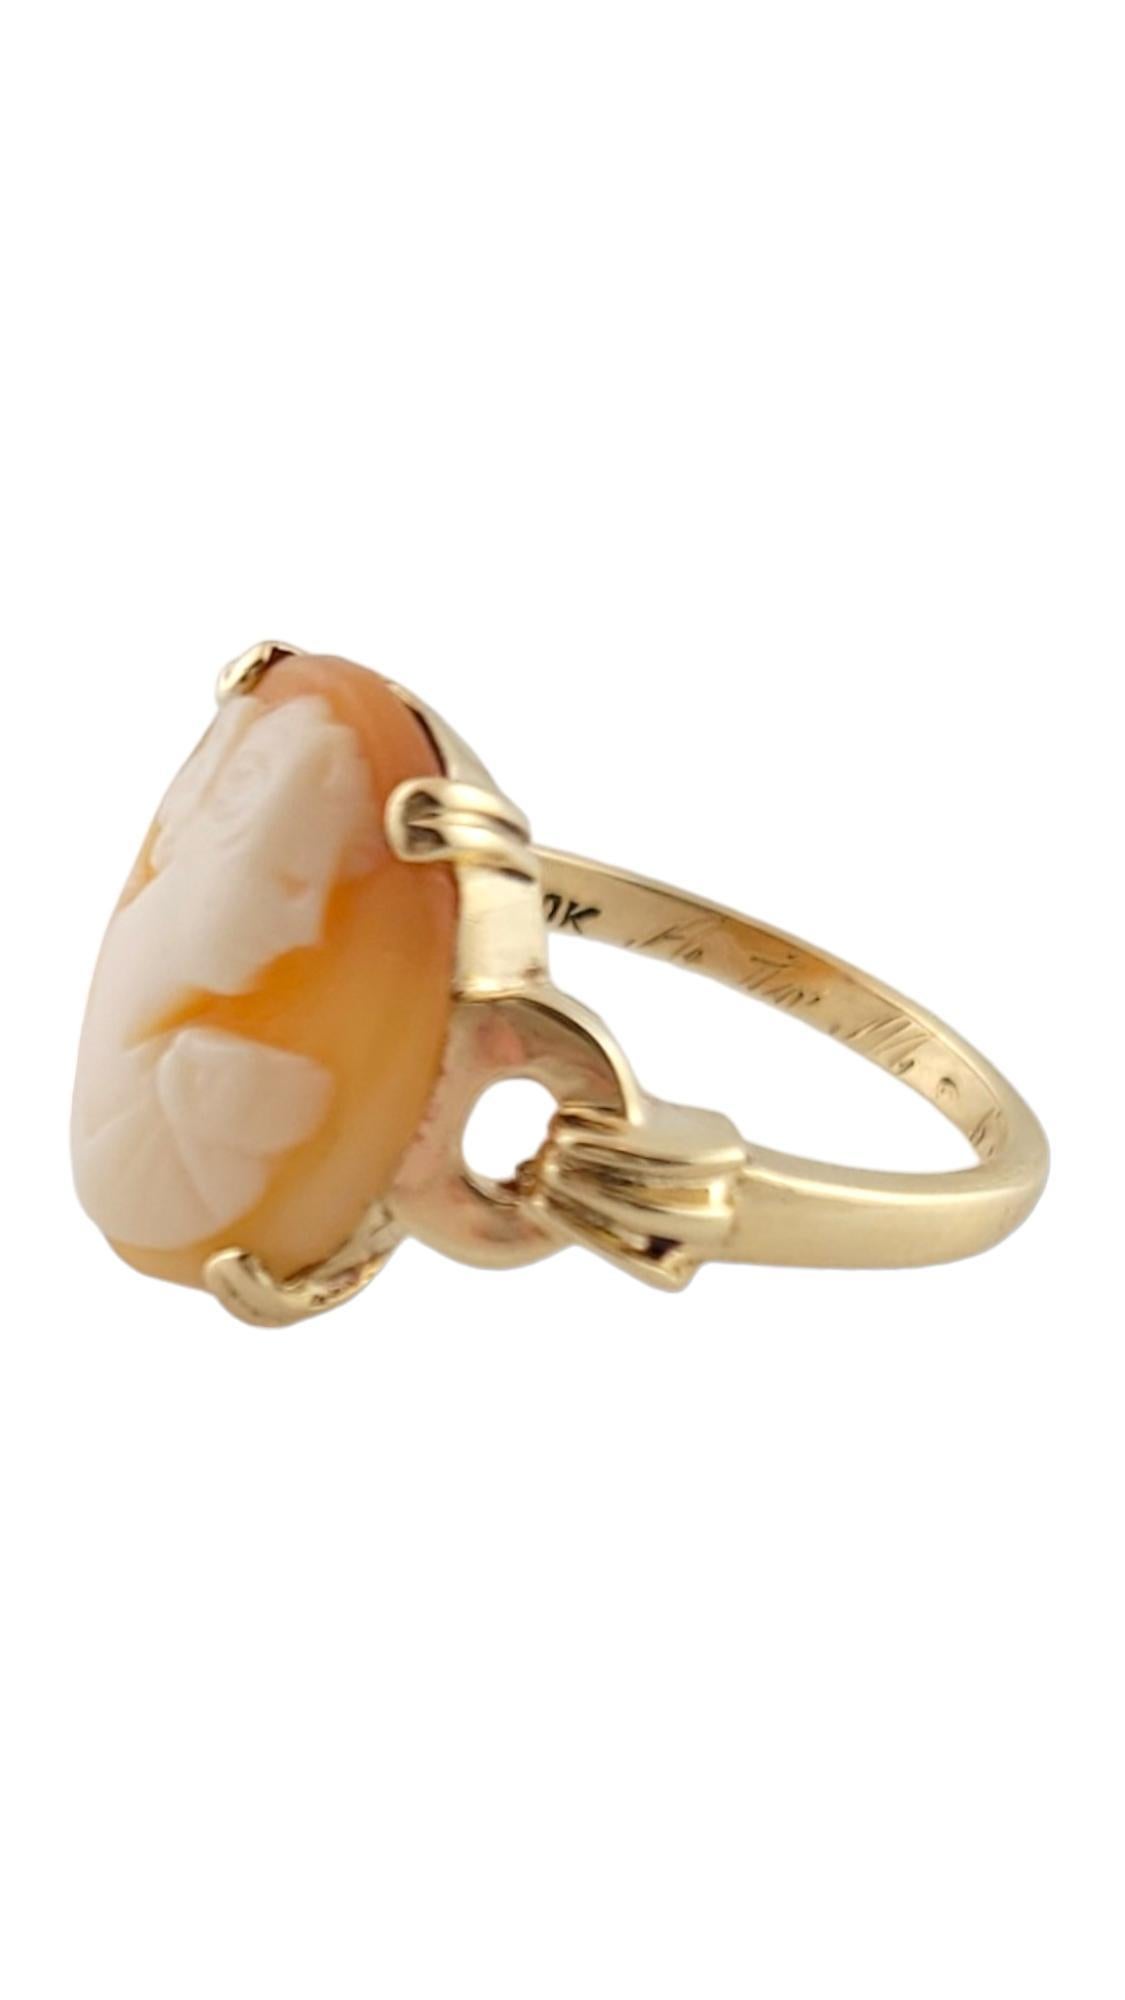 Vintage 10K Yellow Gold Cameo Ring Size 6

This gorgeous cameo ring is crafted from 10K yellow gold and would look beautiful on anyone!

Ring size: 6
Shank: 1.78mm
Front: 14.14mm X 11.74mm X 5.78mm

Engraved 6.12.46

Weight: 3.6 g/ 2.3